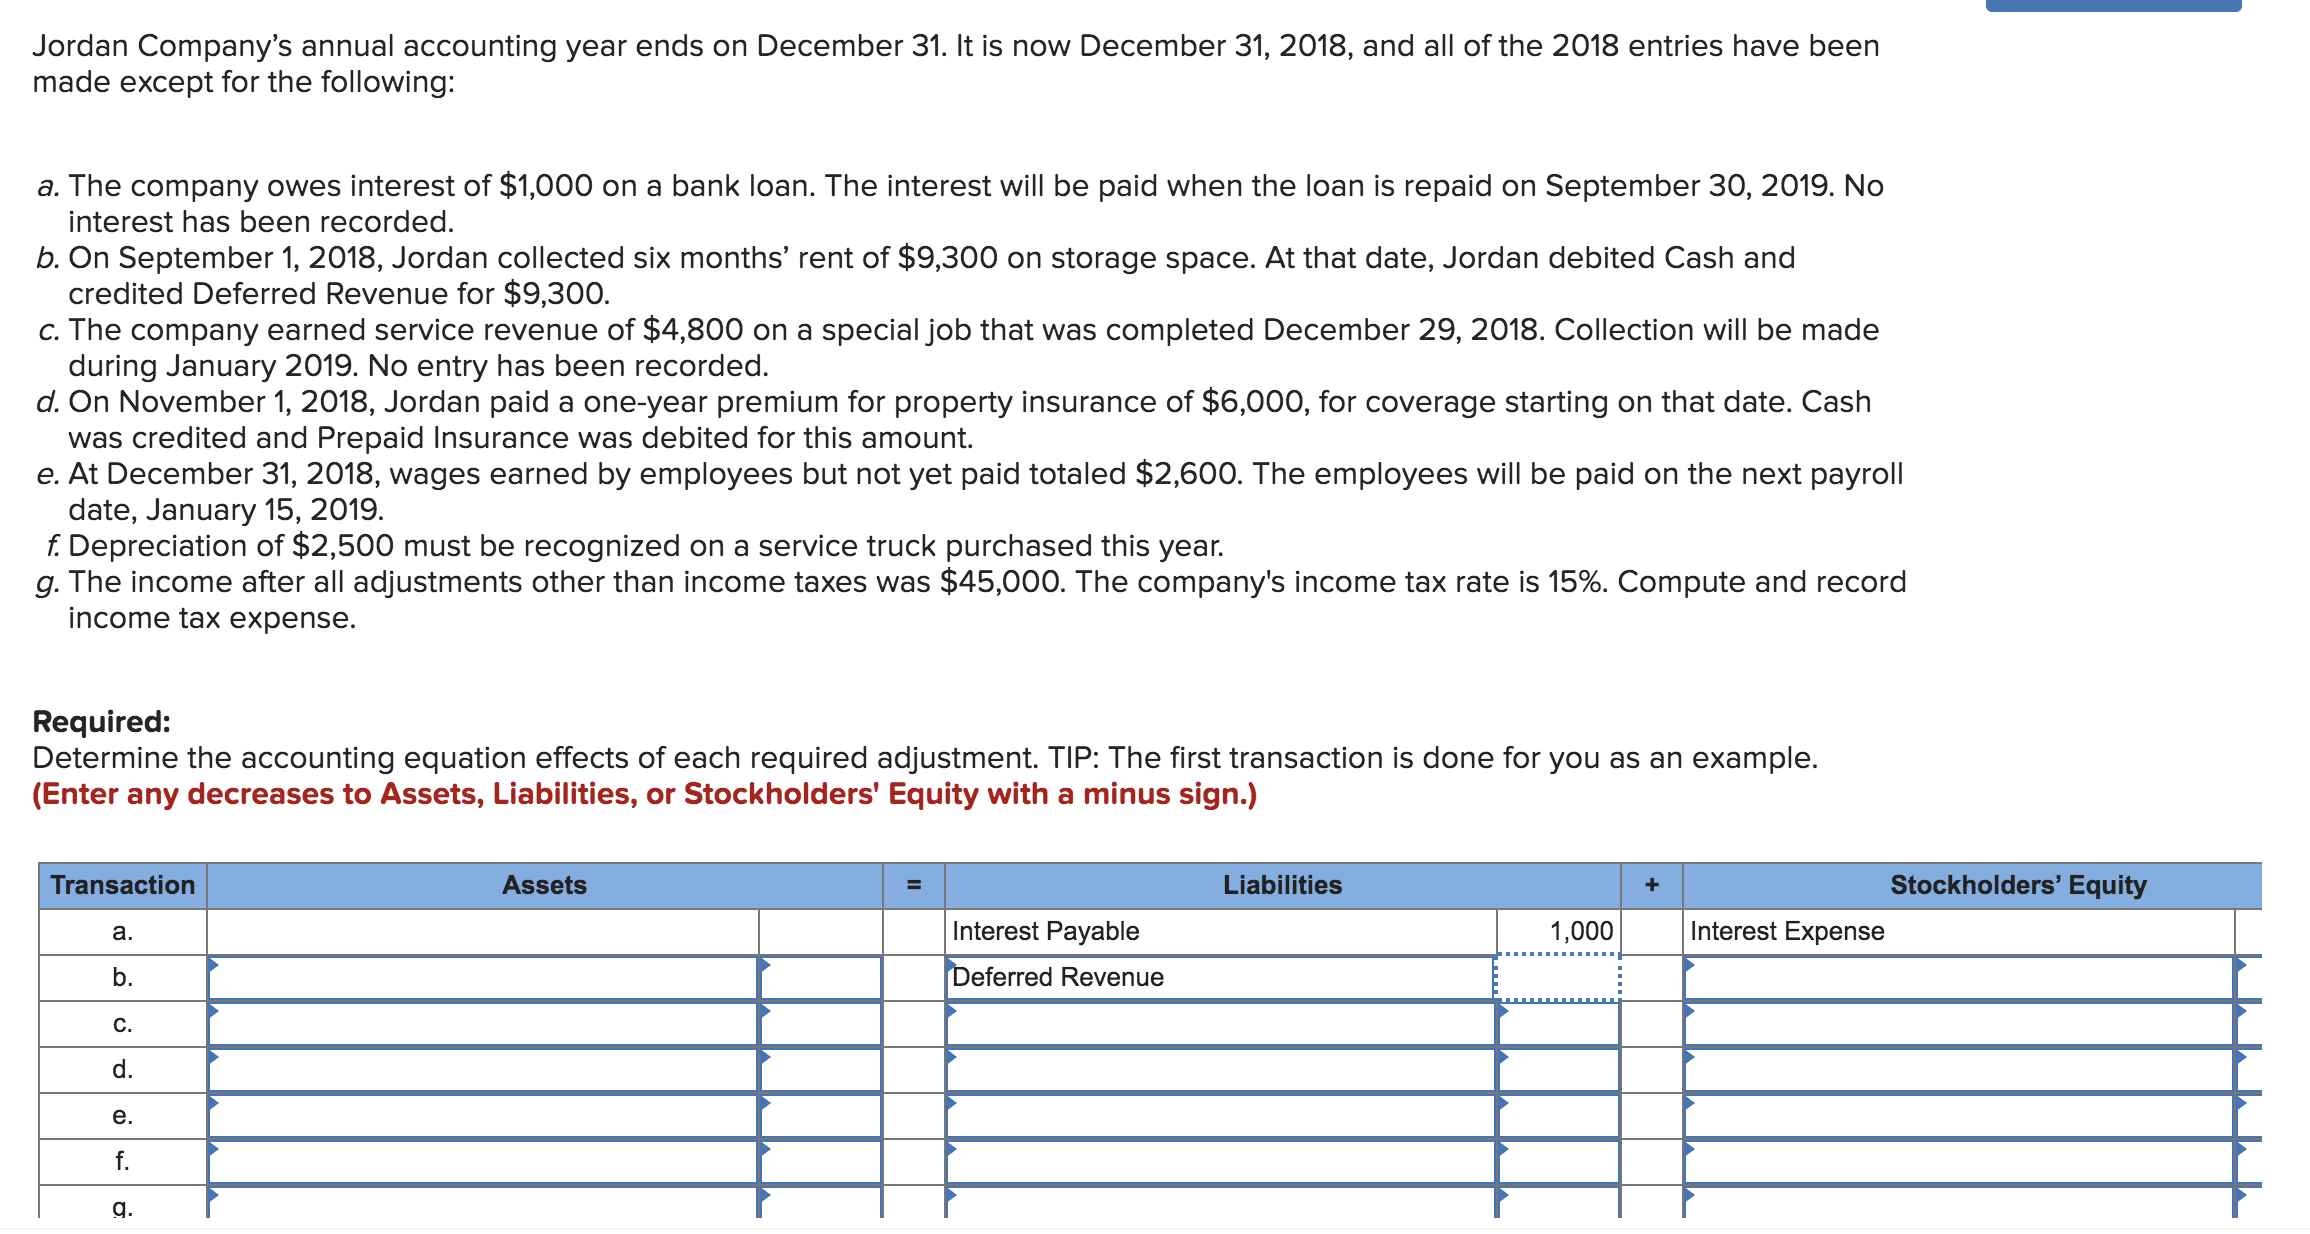 Jordan Company's annual accounting year ends on December 31. It is now December 31, 2018, and all of the 2018 entries have been
made except for the following:
a. The company owes interest of $1,000 on a bank loan. The interest will be paid when the loan is repaid on September 30, 2019. No
interest has been recorded.
b. On September 1, 2018, Jordan collected six months' rent of $9,300 on storage space. At that date, Jordan debited Cash and
credited Deferred Revenue for $9,300.
c. The company earned service revenue of $4,800 on a special job that was completed December 29, 2018. Collection will be made
during January 2019. No entry has been recorded.
d. On November 1, 2018, Jordan paid a one-year premium for property insurance of $6000, for coverage starting on that date. Cash
was credited and Prepaid Insurance was debited for this amount.
e. At December 31, 2018, wages earned by employees but not yet paid totaled $2,600. The employees will be paid on the next payroll
date, January 15, 2019.
f. Depreciation of $2,500 must be recognized on a service truck purchased this year.
g. The income after all adjustments other than income taxes was $45,000. The company's income tax rate is 15%. Compute and record
income tax expense.
Required:
Determine the accounting equation effects of each required adjustment. TIP: The first transaction is done for you as an example.
(Enter any decreases to Assets, Liabilities, or Stockholders' Equity with a minus sign.)
Stockholders' Equity
Assets
Transaction
Liabilities
%3D
Interest Payable
Interest Expense
1,000
a.
Deferred Revenue
b.
C.
d.
e.
f.
g.
